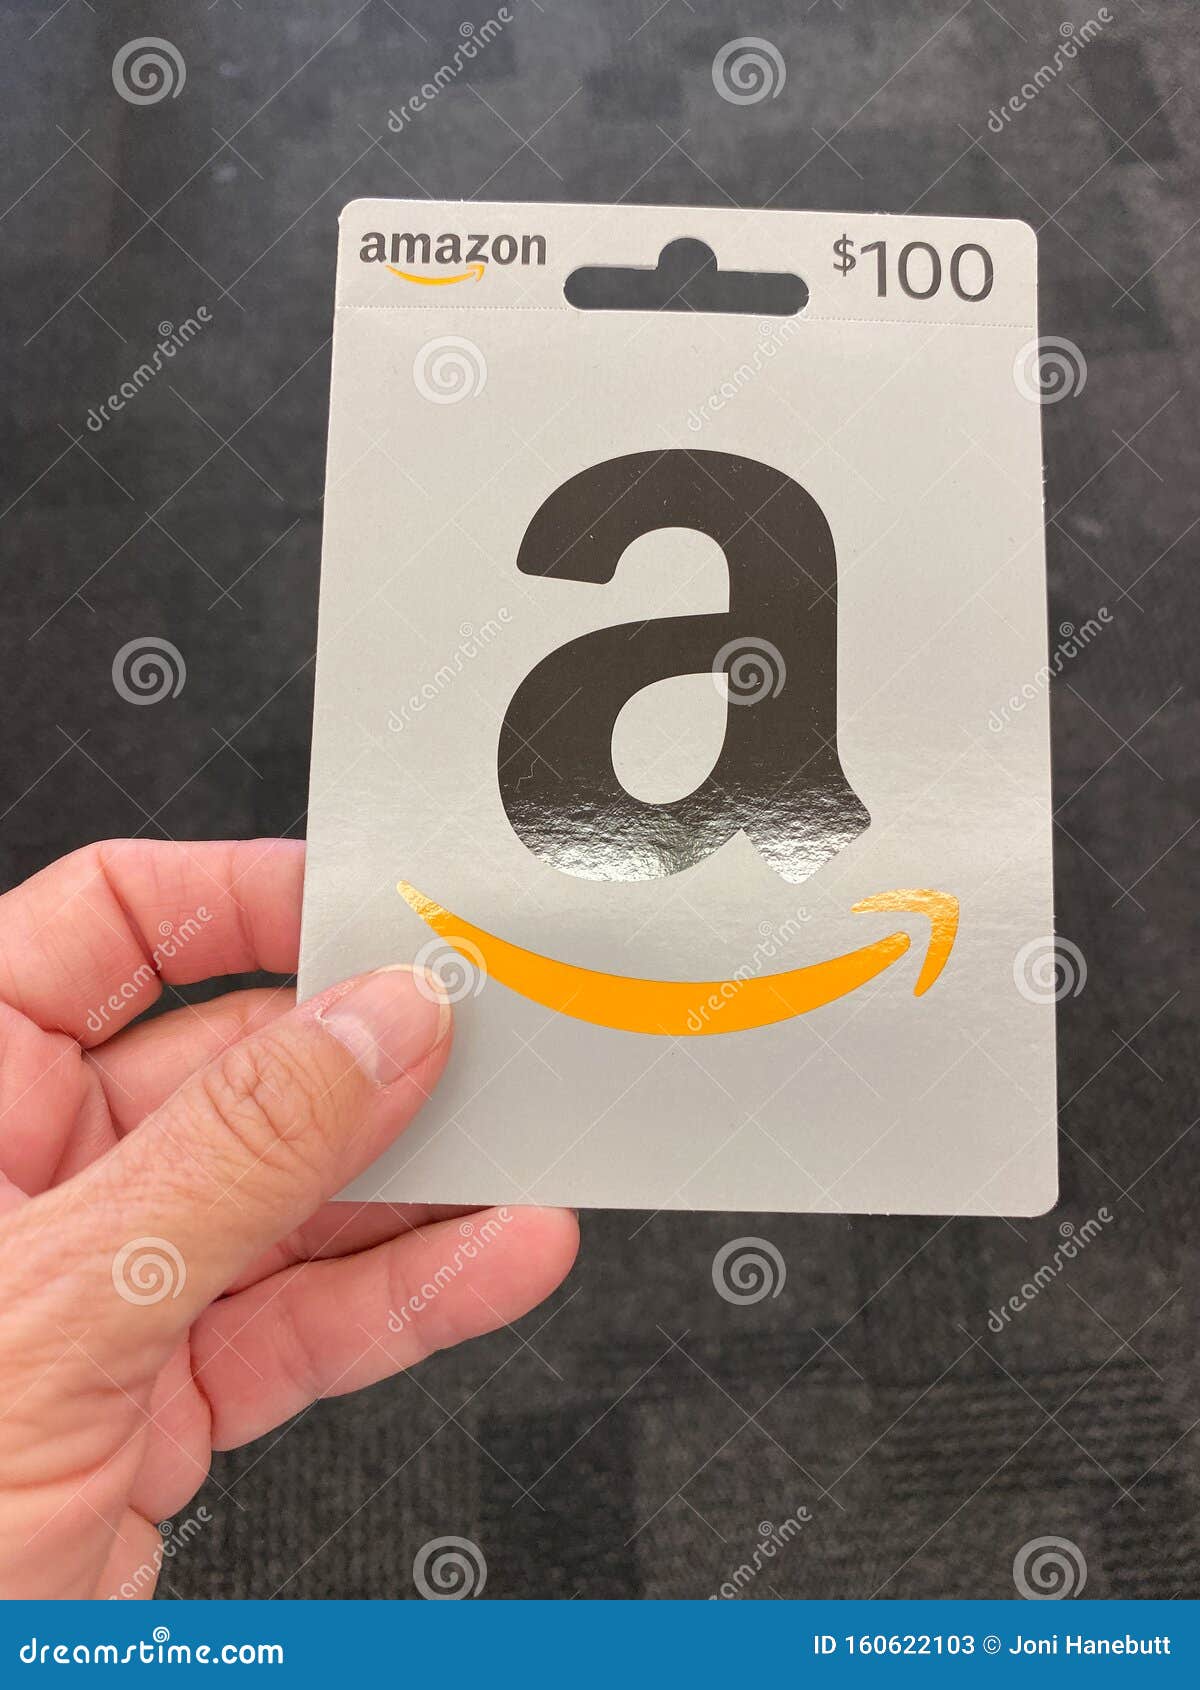 An Amazon Gift Card Ready For A Person To Purchase